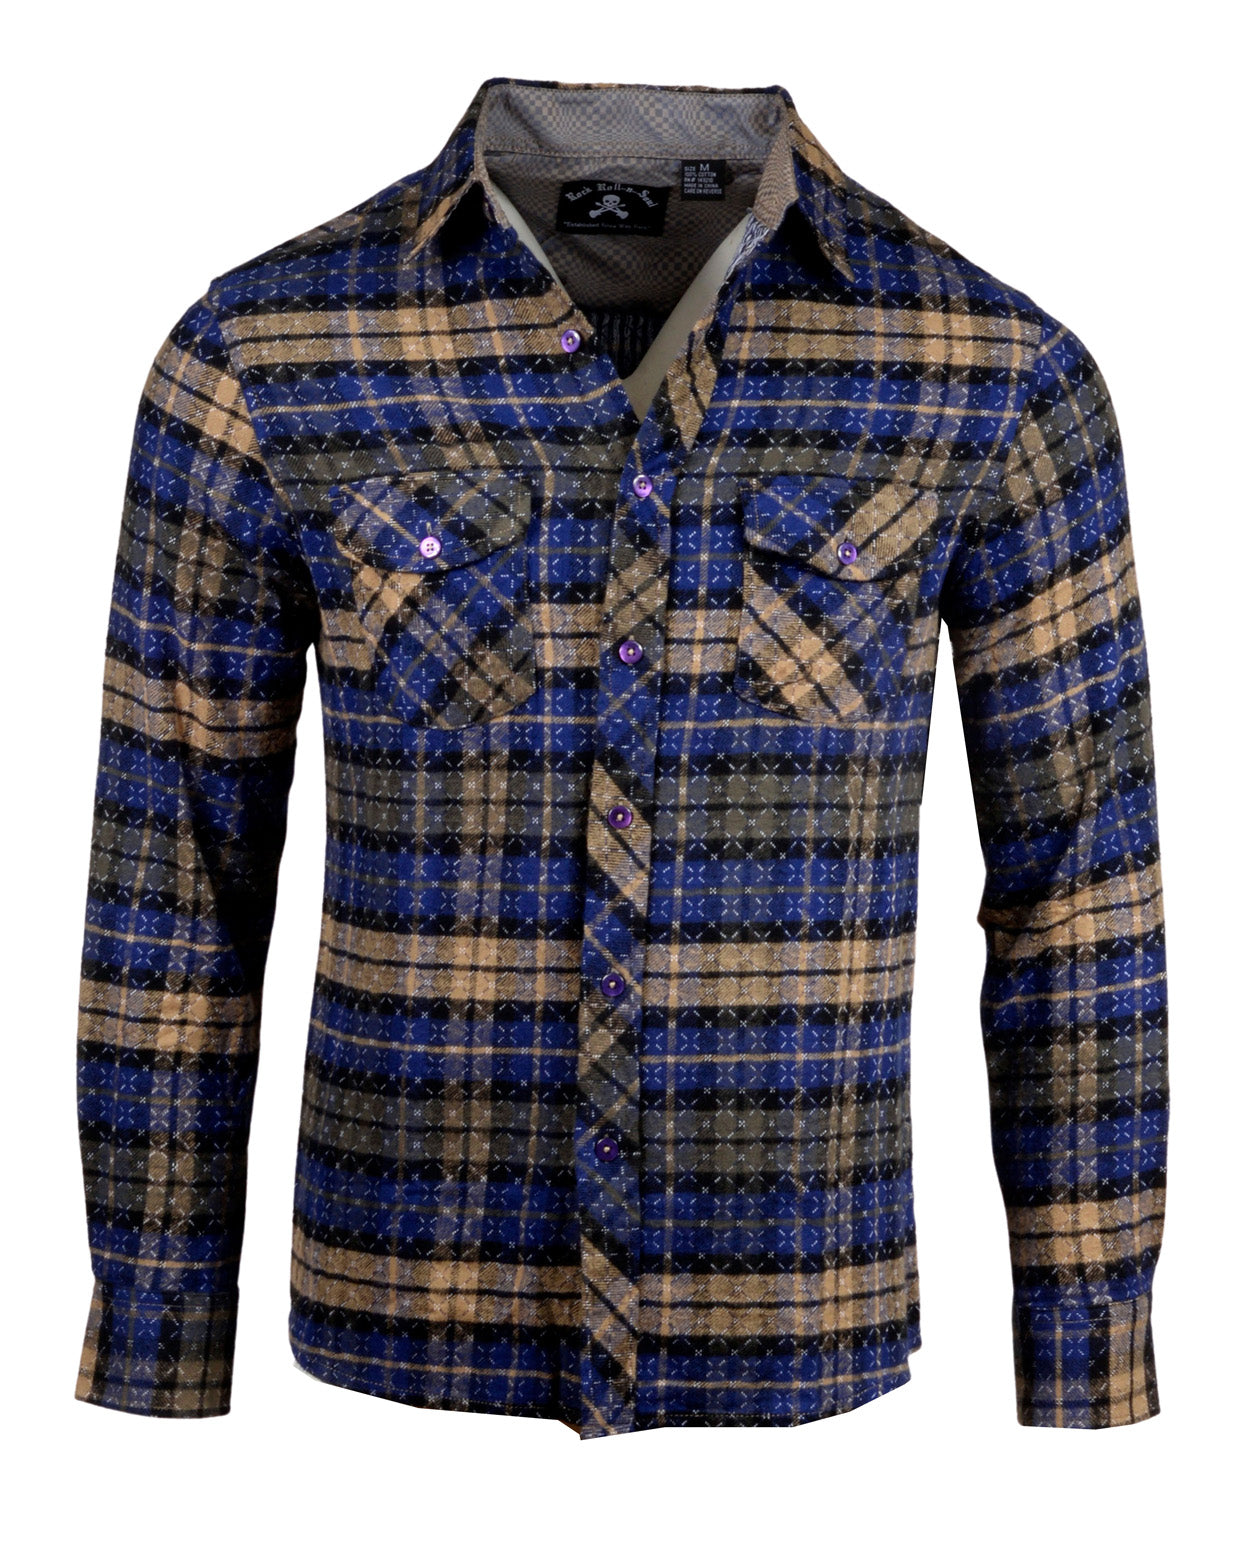 Men's Casual Flannel Fashion Button Up Shirt - Get Rhythm in Navy  by Rock Roll n Soul